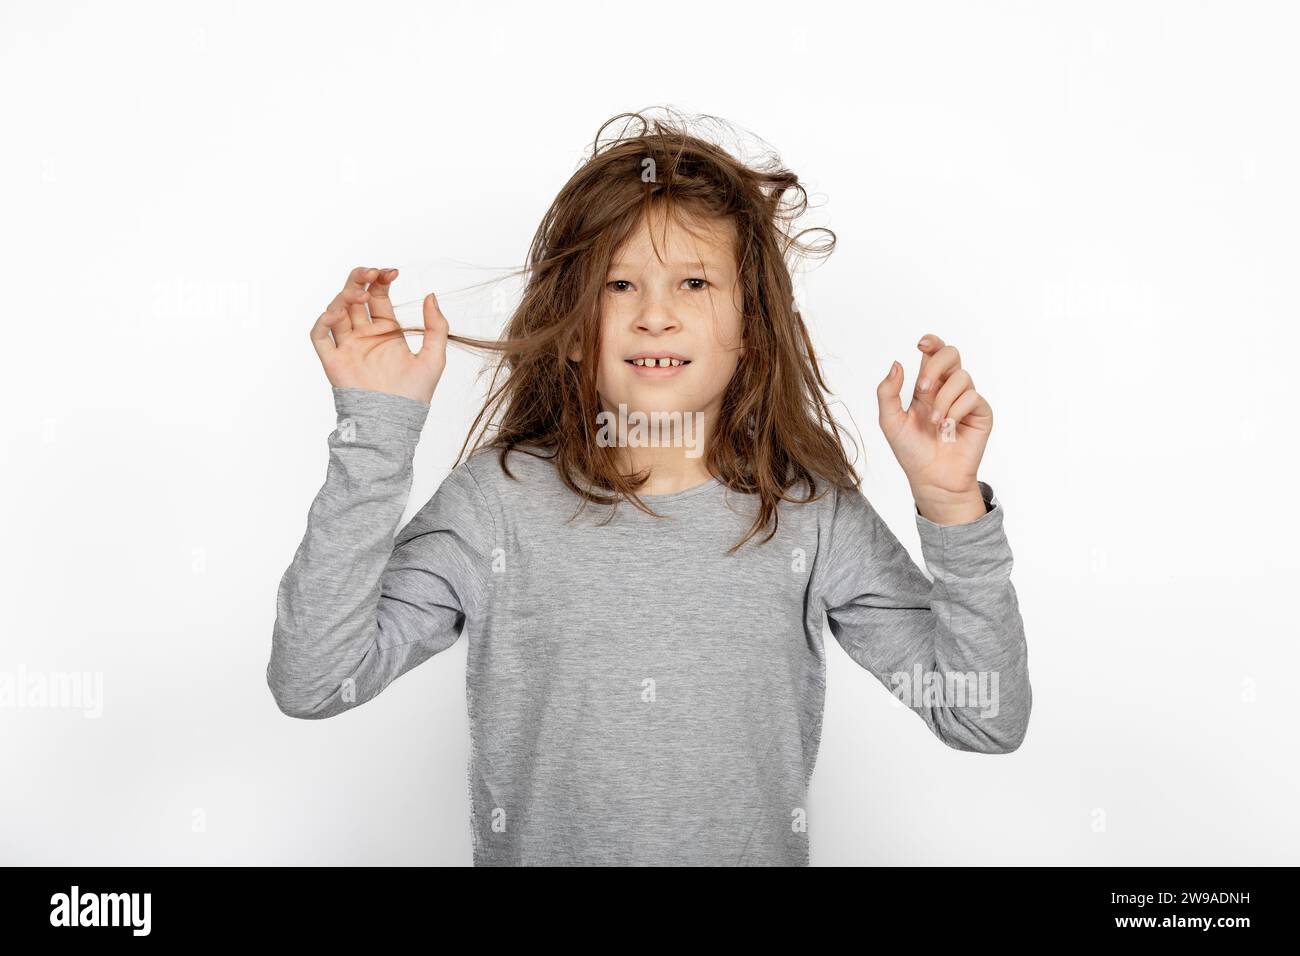 Christmas Morning Chaos: Disheveled Young Girl Waking Up in a Bad Hair Day Portrait Stock Photo